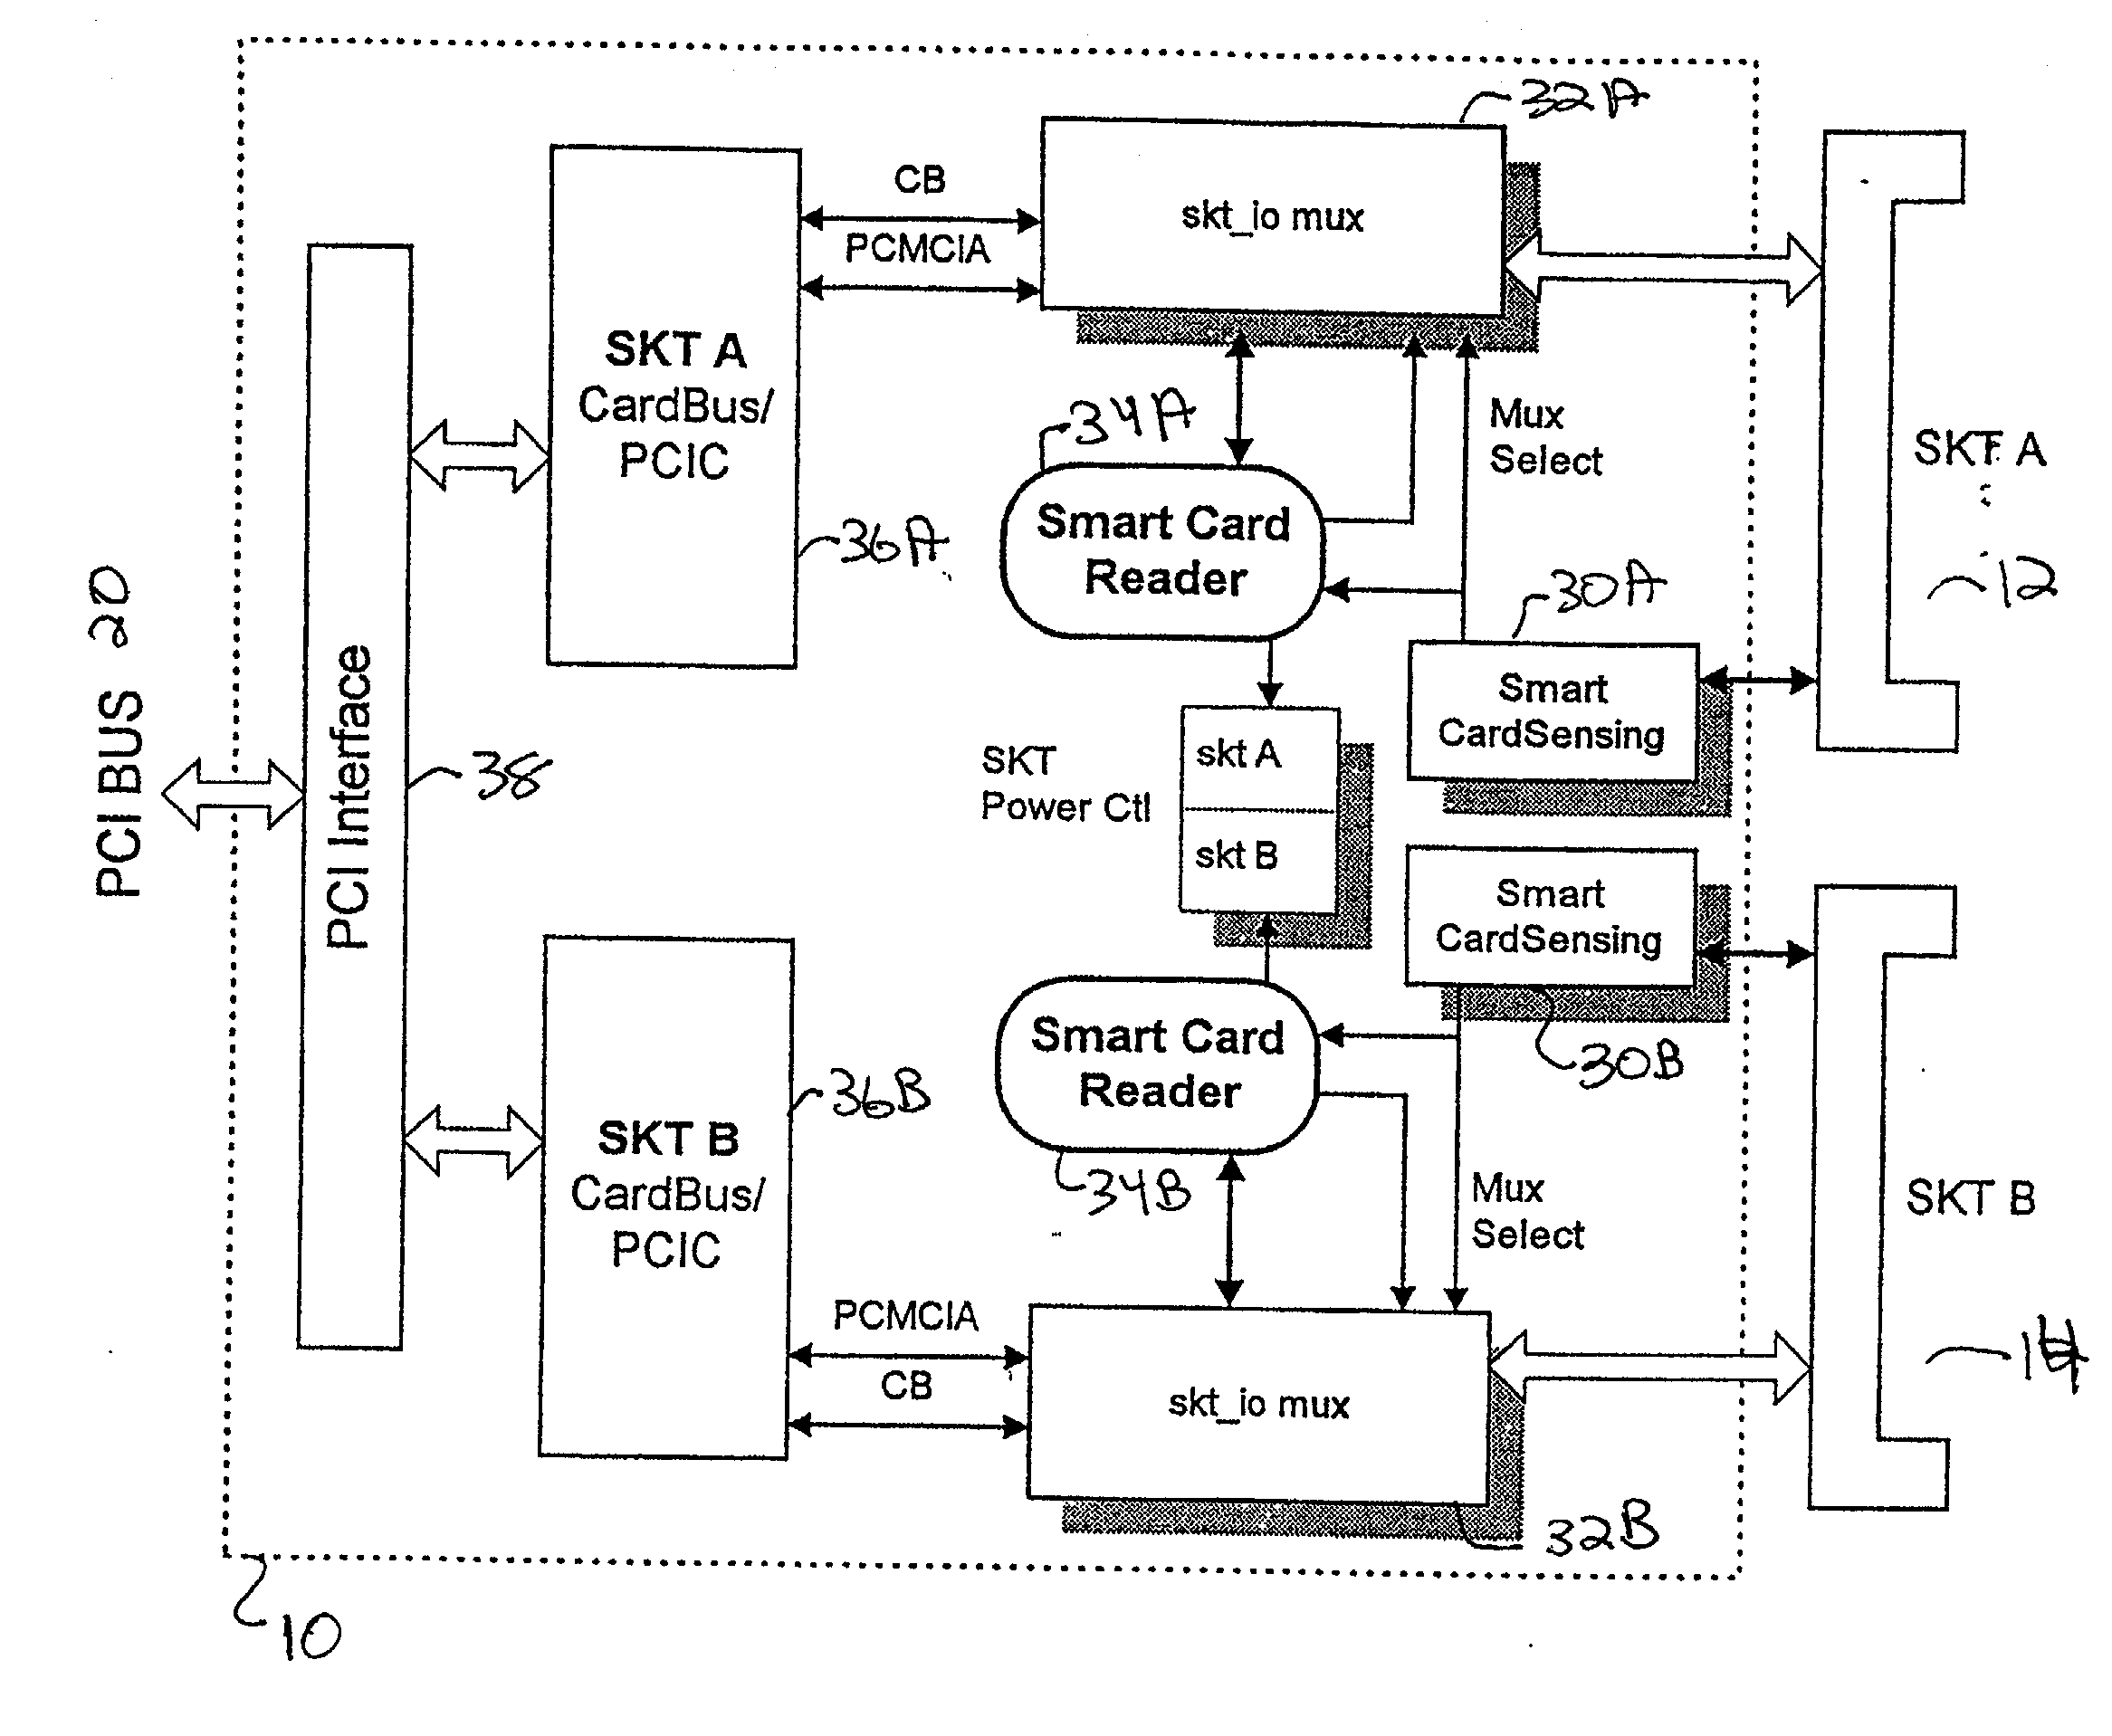 Integrated PC Card host controller for the detection and operation of a plurality of expansion cards